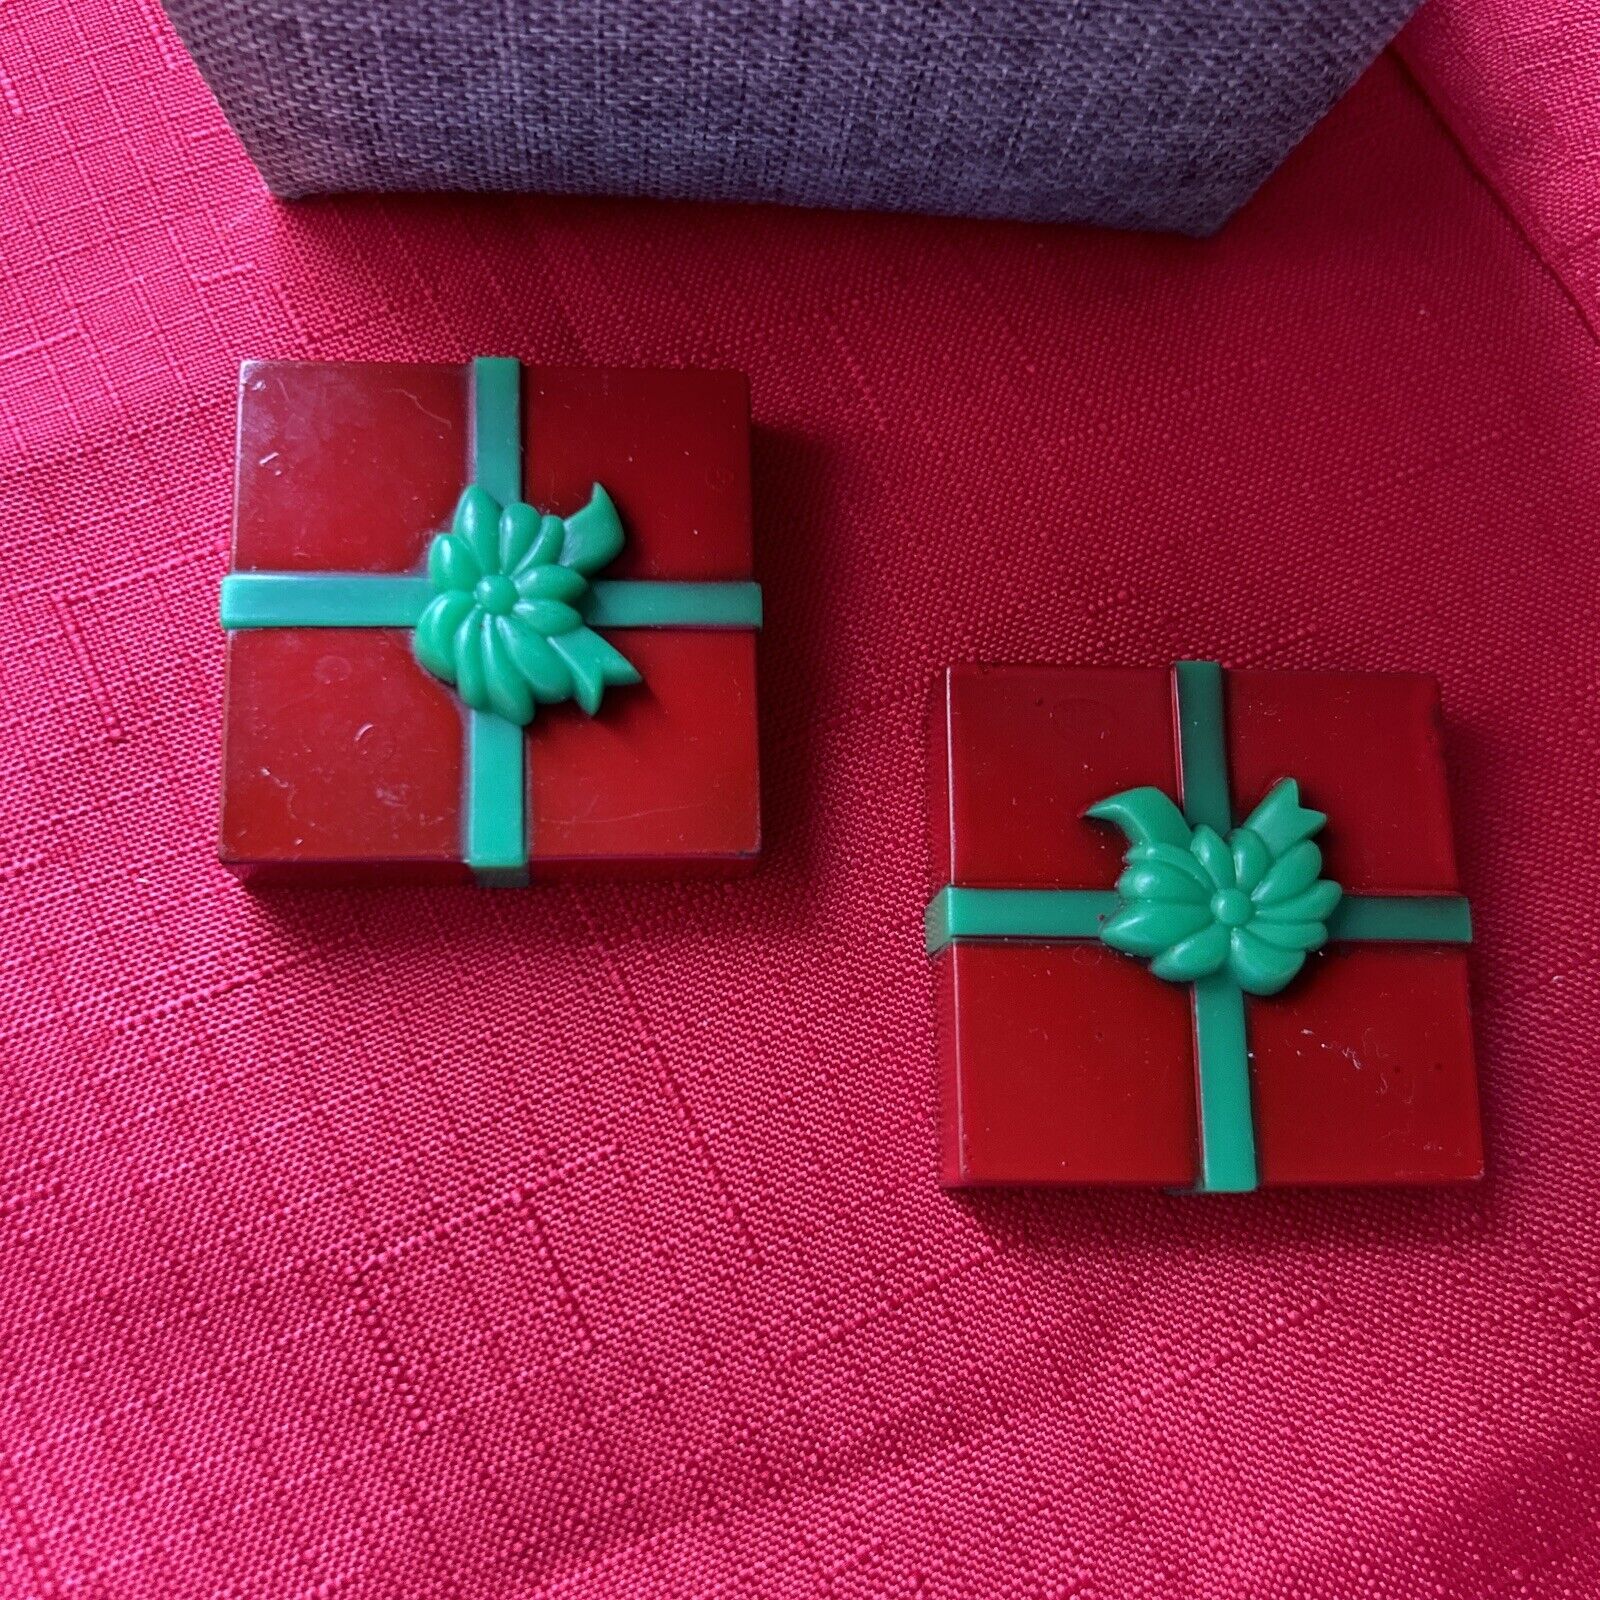 Lot of 2 Vintage Plastic Christmas Gift Refrigerator Magnets Made in Hong Kong